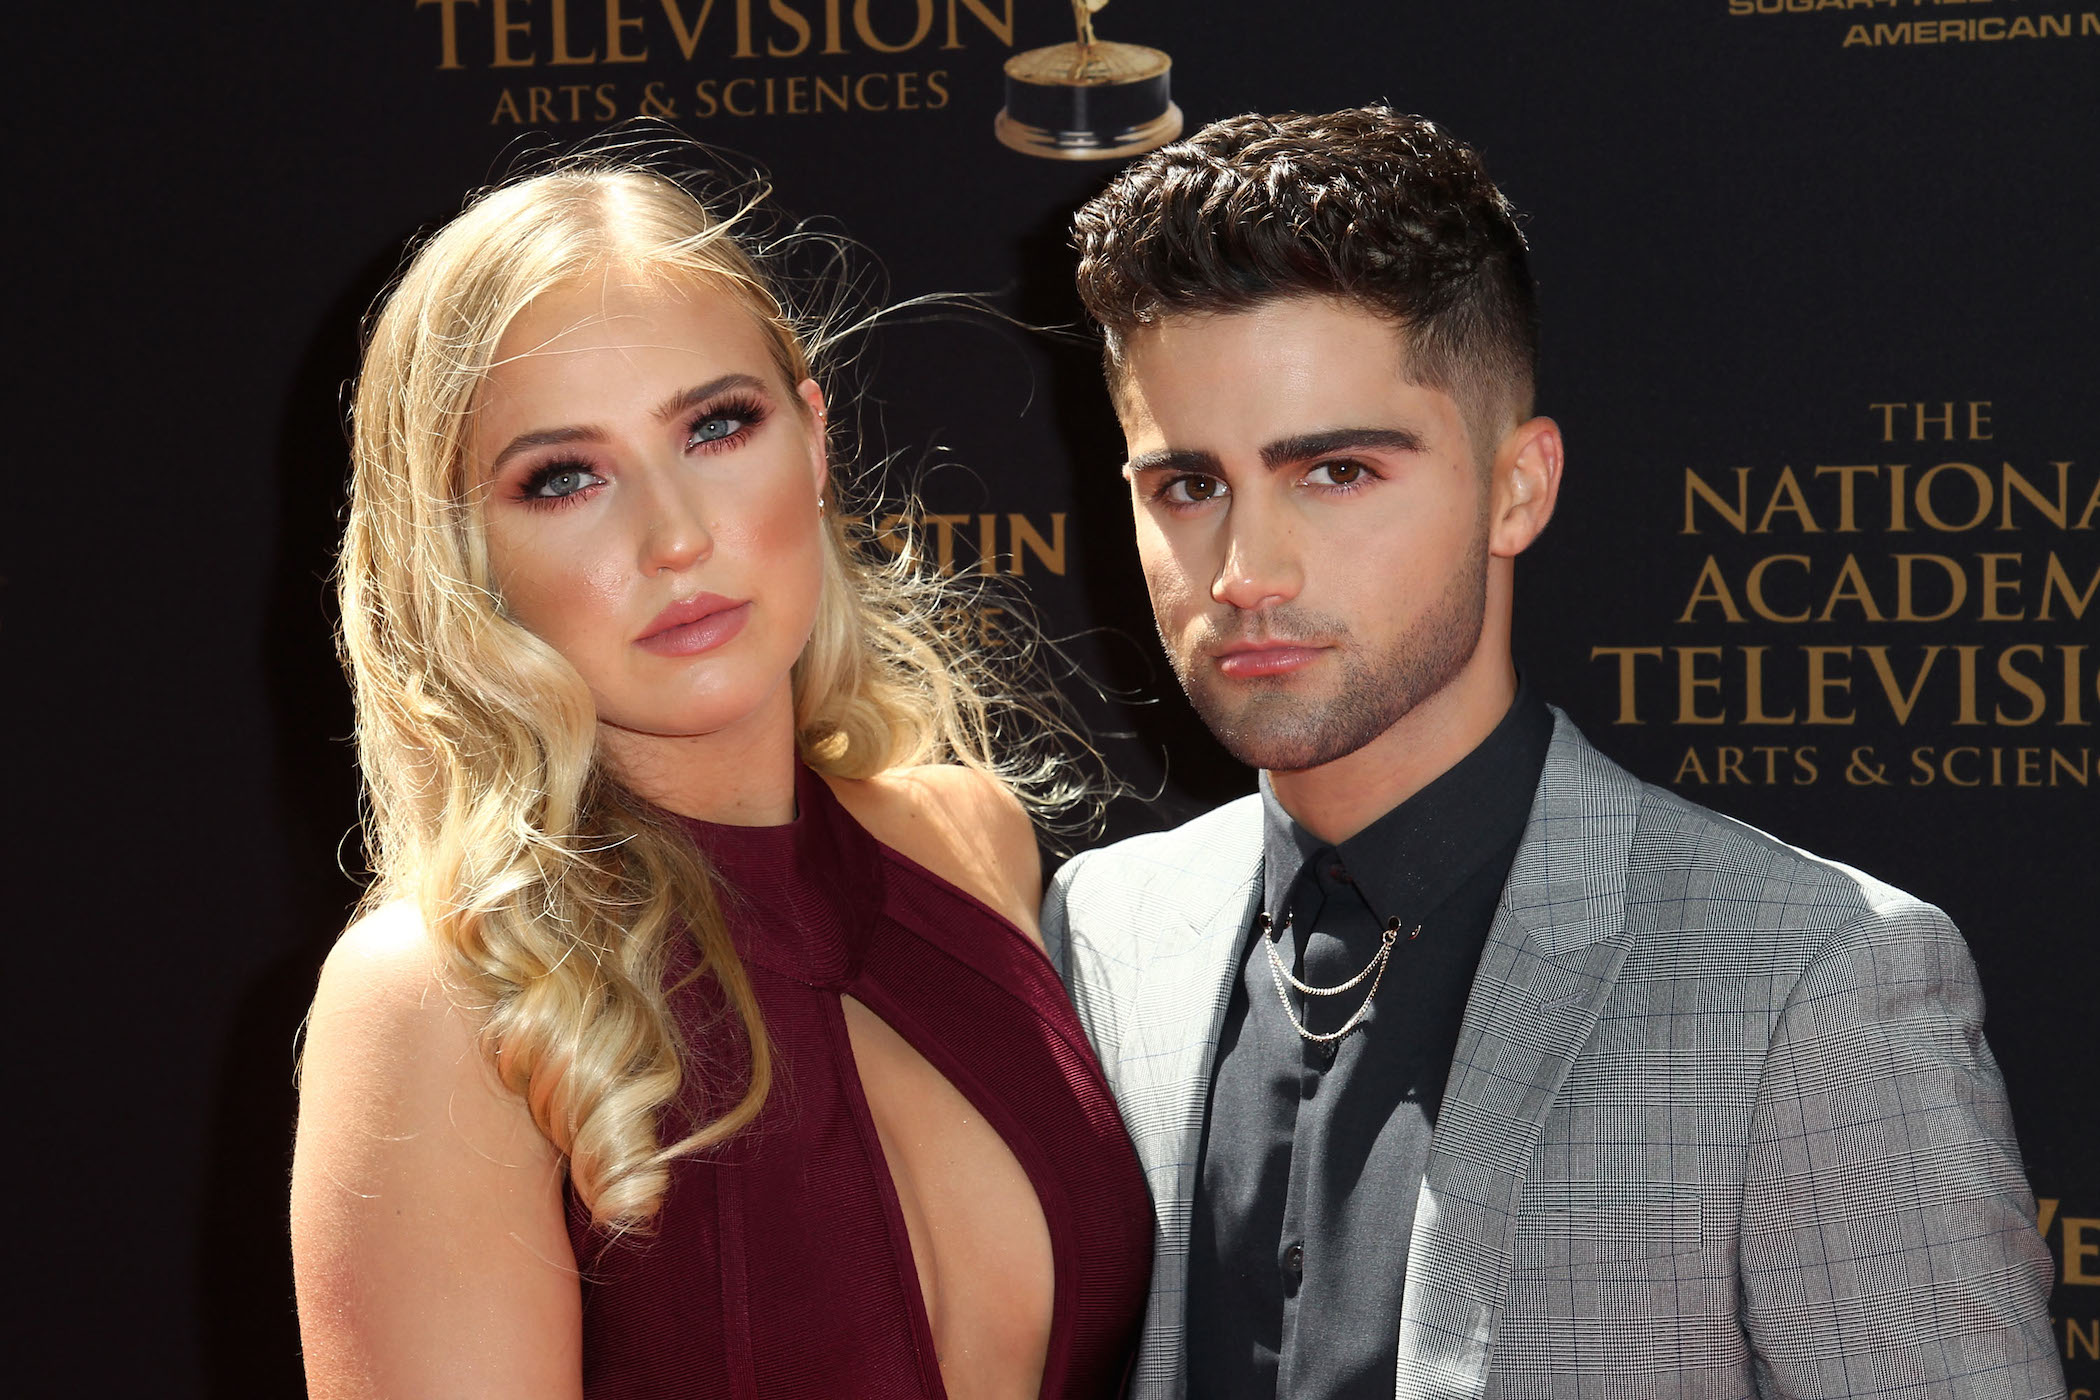 Veronica Dunne and Max Ehrich attend the 2016 Daytime Emmy Awards